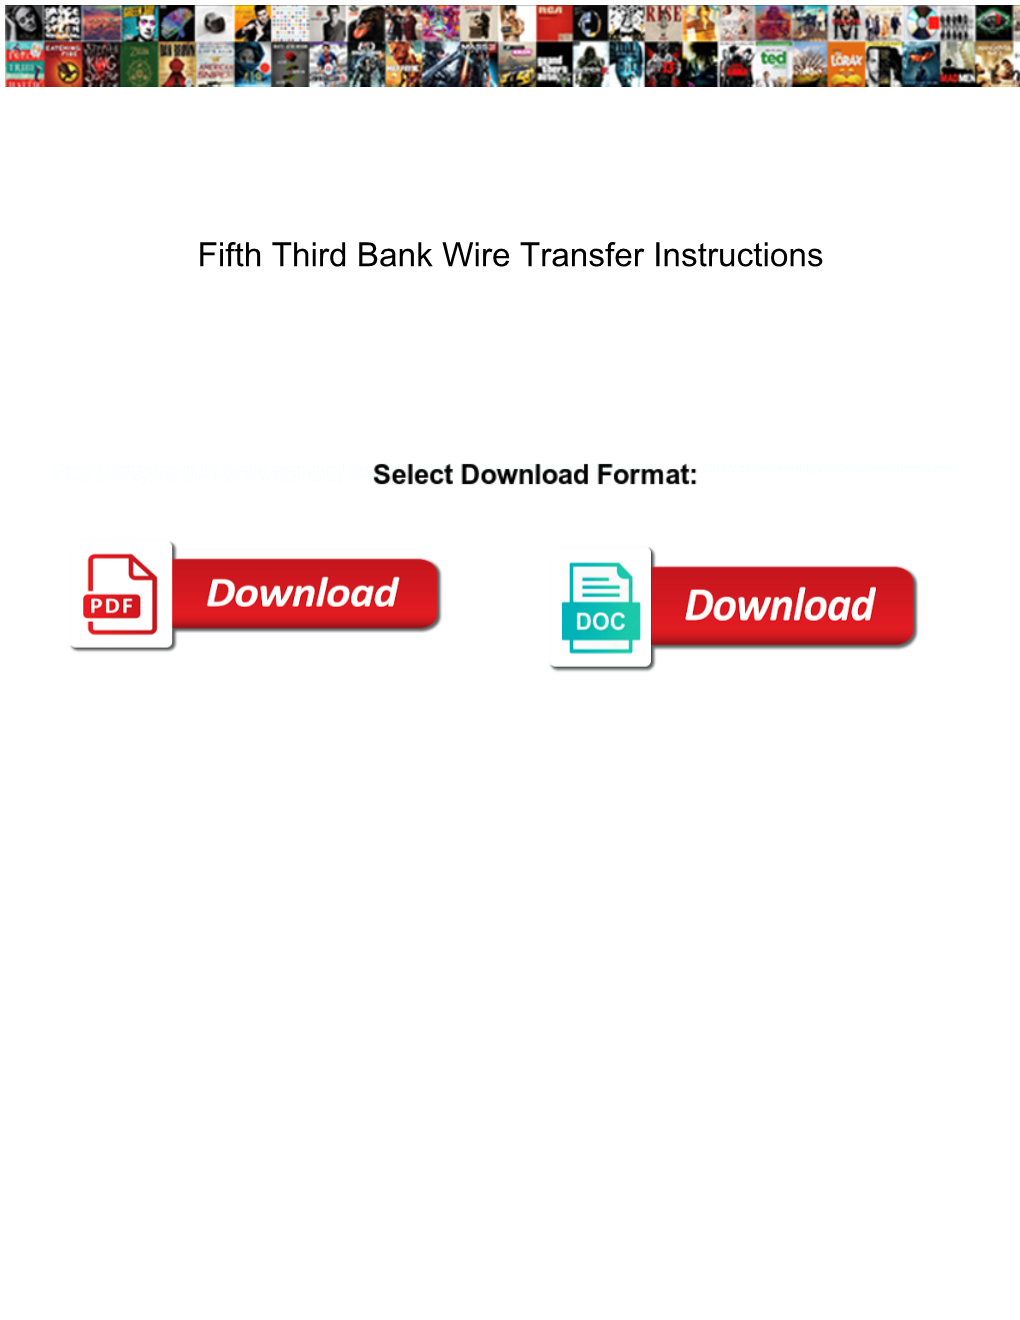 Fifth Third Bank Wire Transfer Instructions